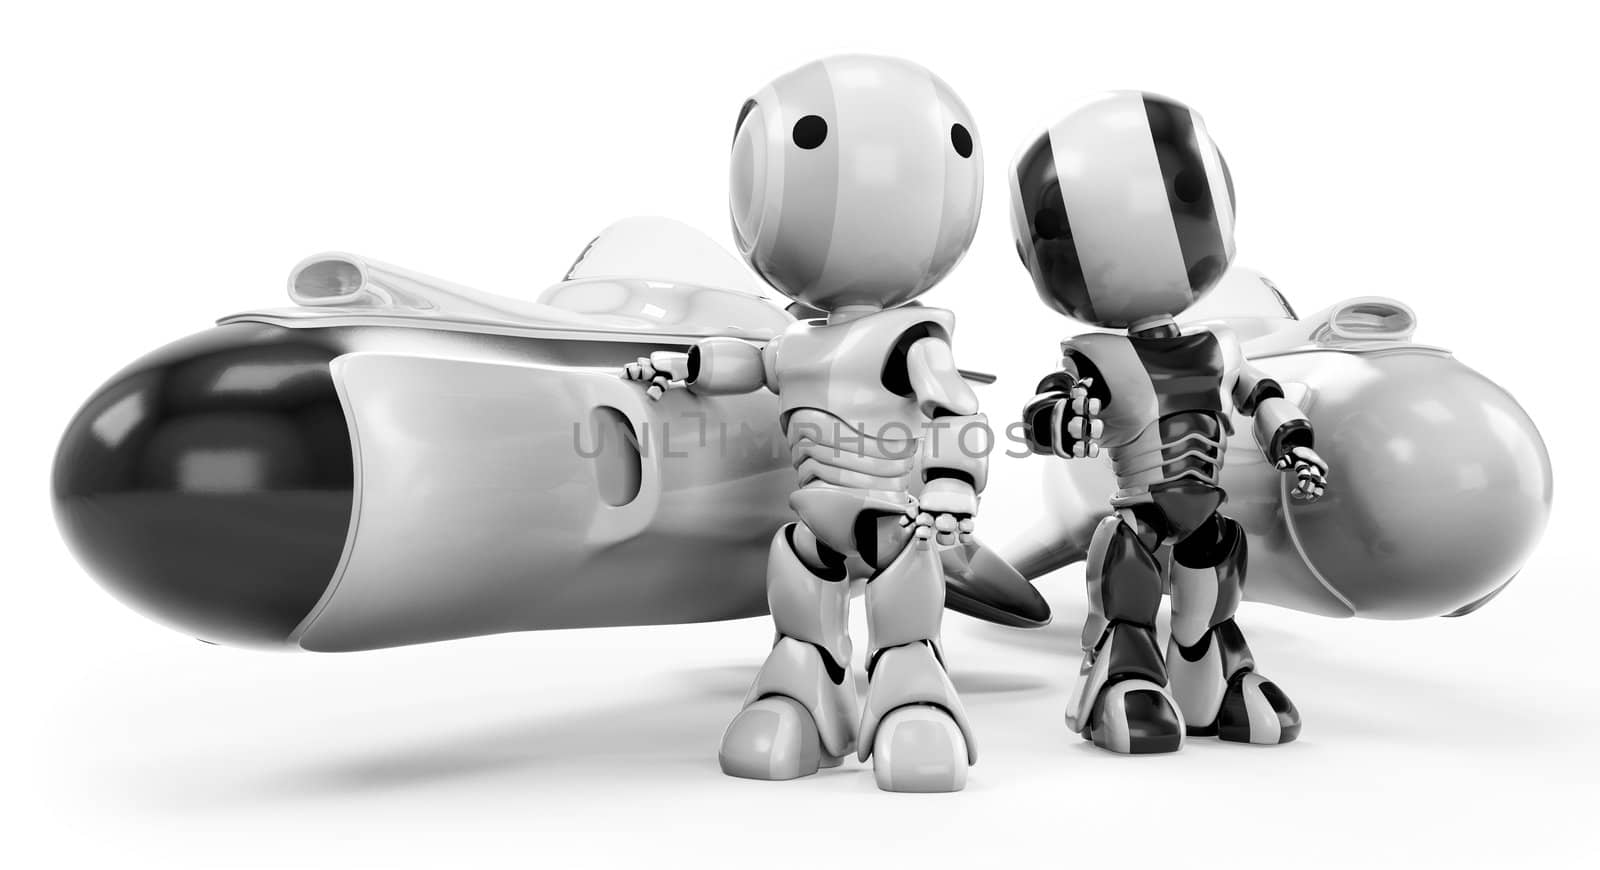 Two Robots with Hover Rockets by LeoBlanchette